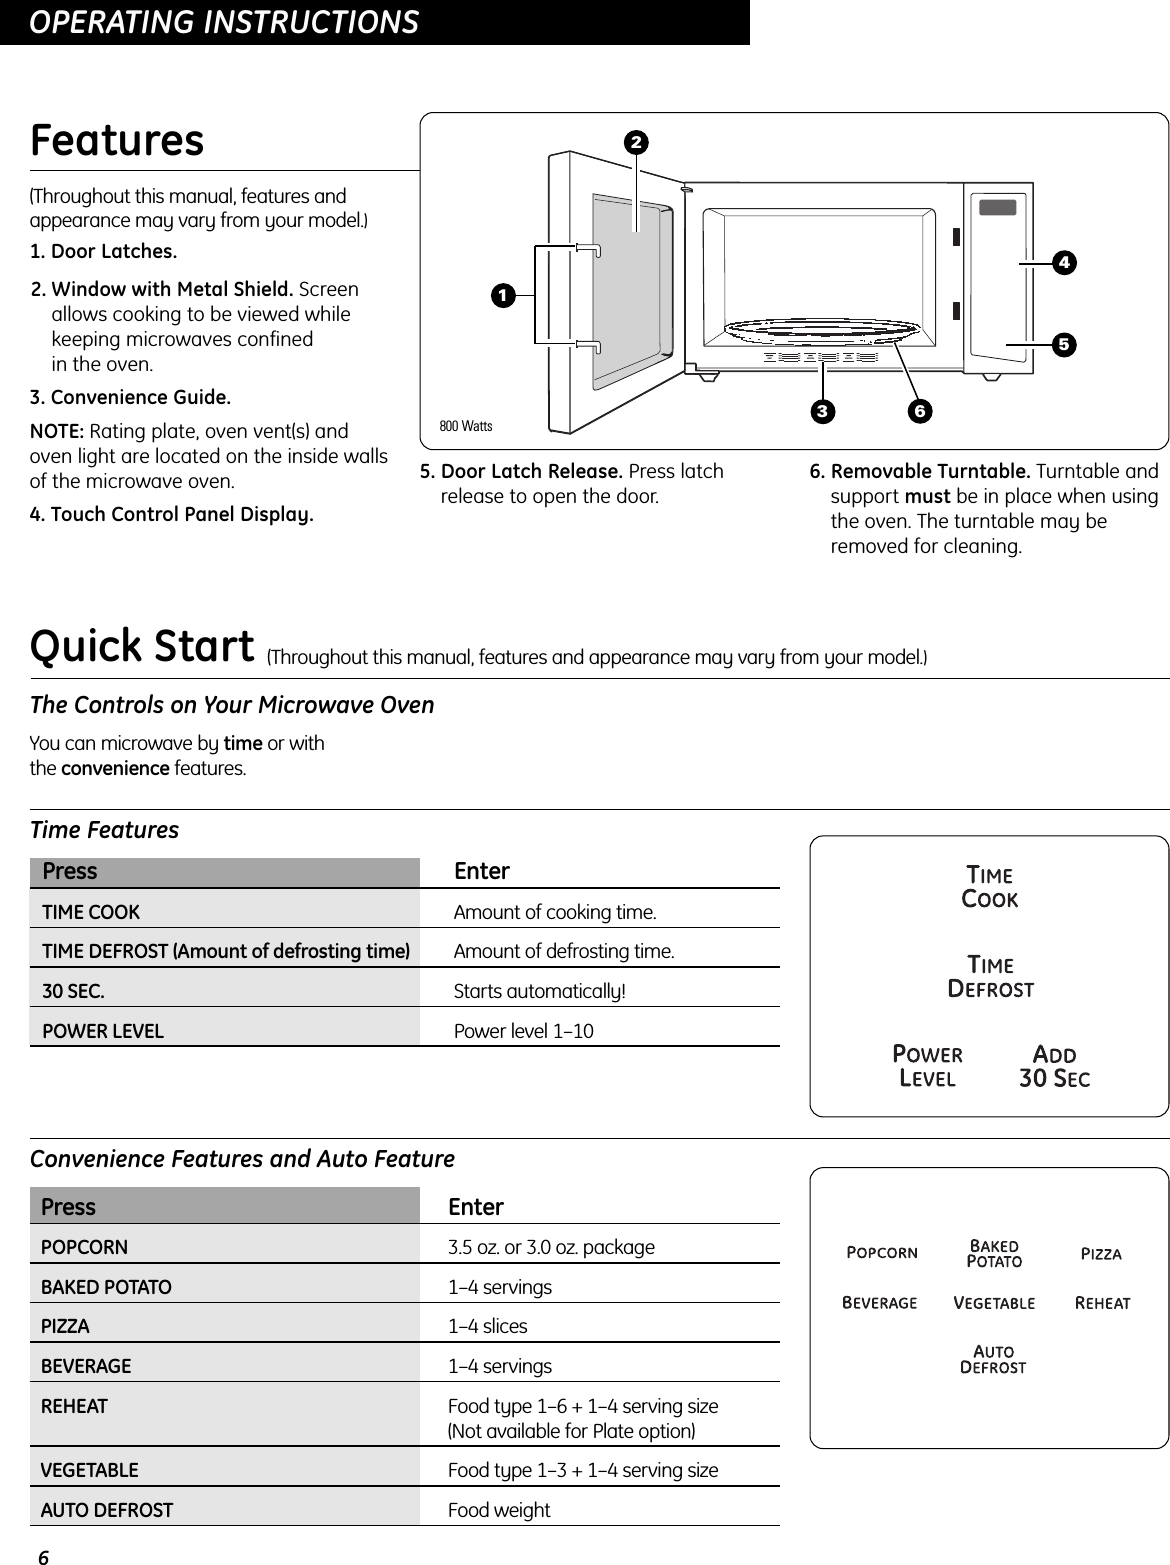 6OPERATING INSTRUCTIONSFeatures(Throughout this manual, features andappearance may vary from your model.)1. Door Latches. 2. Window with Metal Shield. Screenallows cooking to be viewed whilekeeping microwaves confined in the oven.3. Convenience Guide.NOTE: Rating plate, oven vent(s) andoven light are located on the inside wallsof the microwave oven.4. Touch Control Panel Display.5. Door Latch Release. Press latchrelease to open the door. 6. Removable Turntable. Turntable andsupport must be in place when usingthe oven. The turntable may beremoved for cleaning. 13Press EnterTIME COOK Amount of cooking time.TIME DEFROST (Amount of defrosting time) Amount of defrosting time.30 SEC. Starts automatically!POWER LEVEL Power level 1–10 Time FeaturesQuick Start (Throughout this manual, features and appearance may vary from your model.)The Controls on Your Microwave OvenYou can microwave by time or with the convenience features.Convenience Features and Auto Feature524Press EnterPOPCORN 3.5 oz. or 3.0 oz. packageBAKED POTATO 1–4 servingsPIZZA 1–4 slicesBEVERAGE 1–4 servingsREHEAT Food type 1–6 + 1–4 serving size (Not available for Plate option)VEGETABLE Food type 1–3 + 1–4 serving sizeAUTO DEFROST Food weight6800 Watts